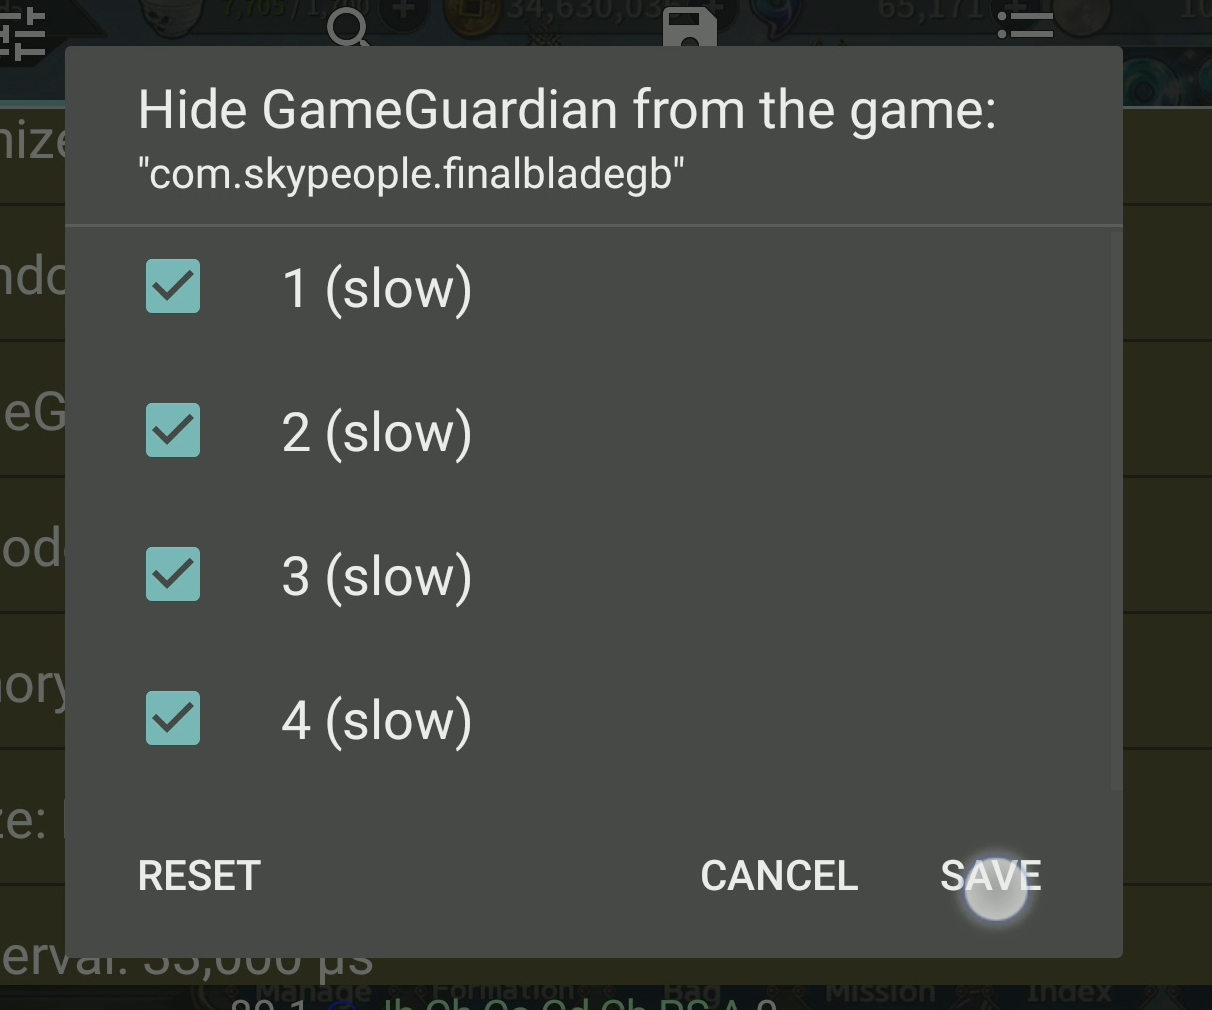 GameGuardian on X: GameGuardian 8.69.0 - Bypass ptrace protection. - Added  4 item to hide from the game. - Added deep reading option. - Improved  support for devices with a broken kernel.